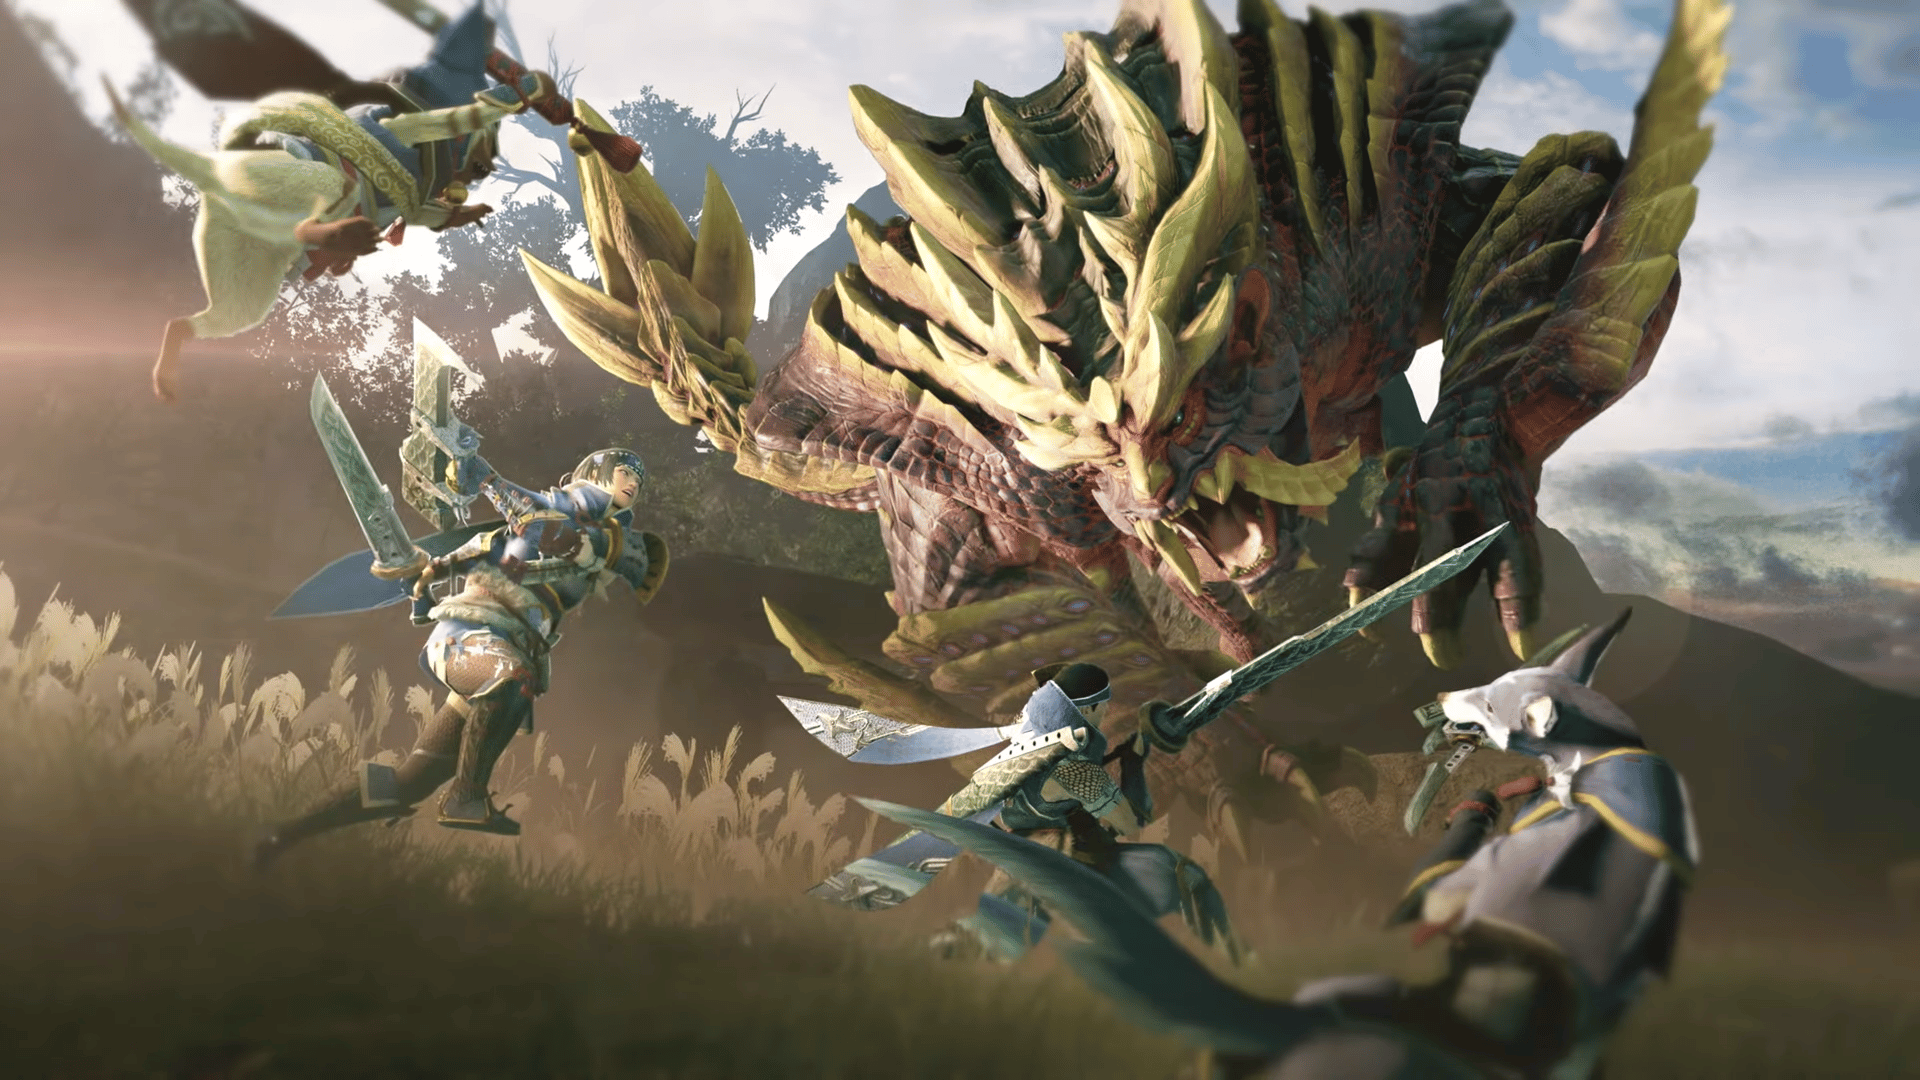 Confirmed: Monster Hunter Rise is coming to Xbox and Game Pass in 2023